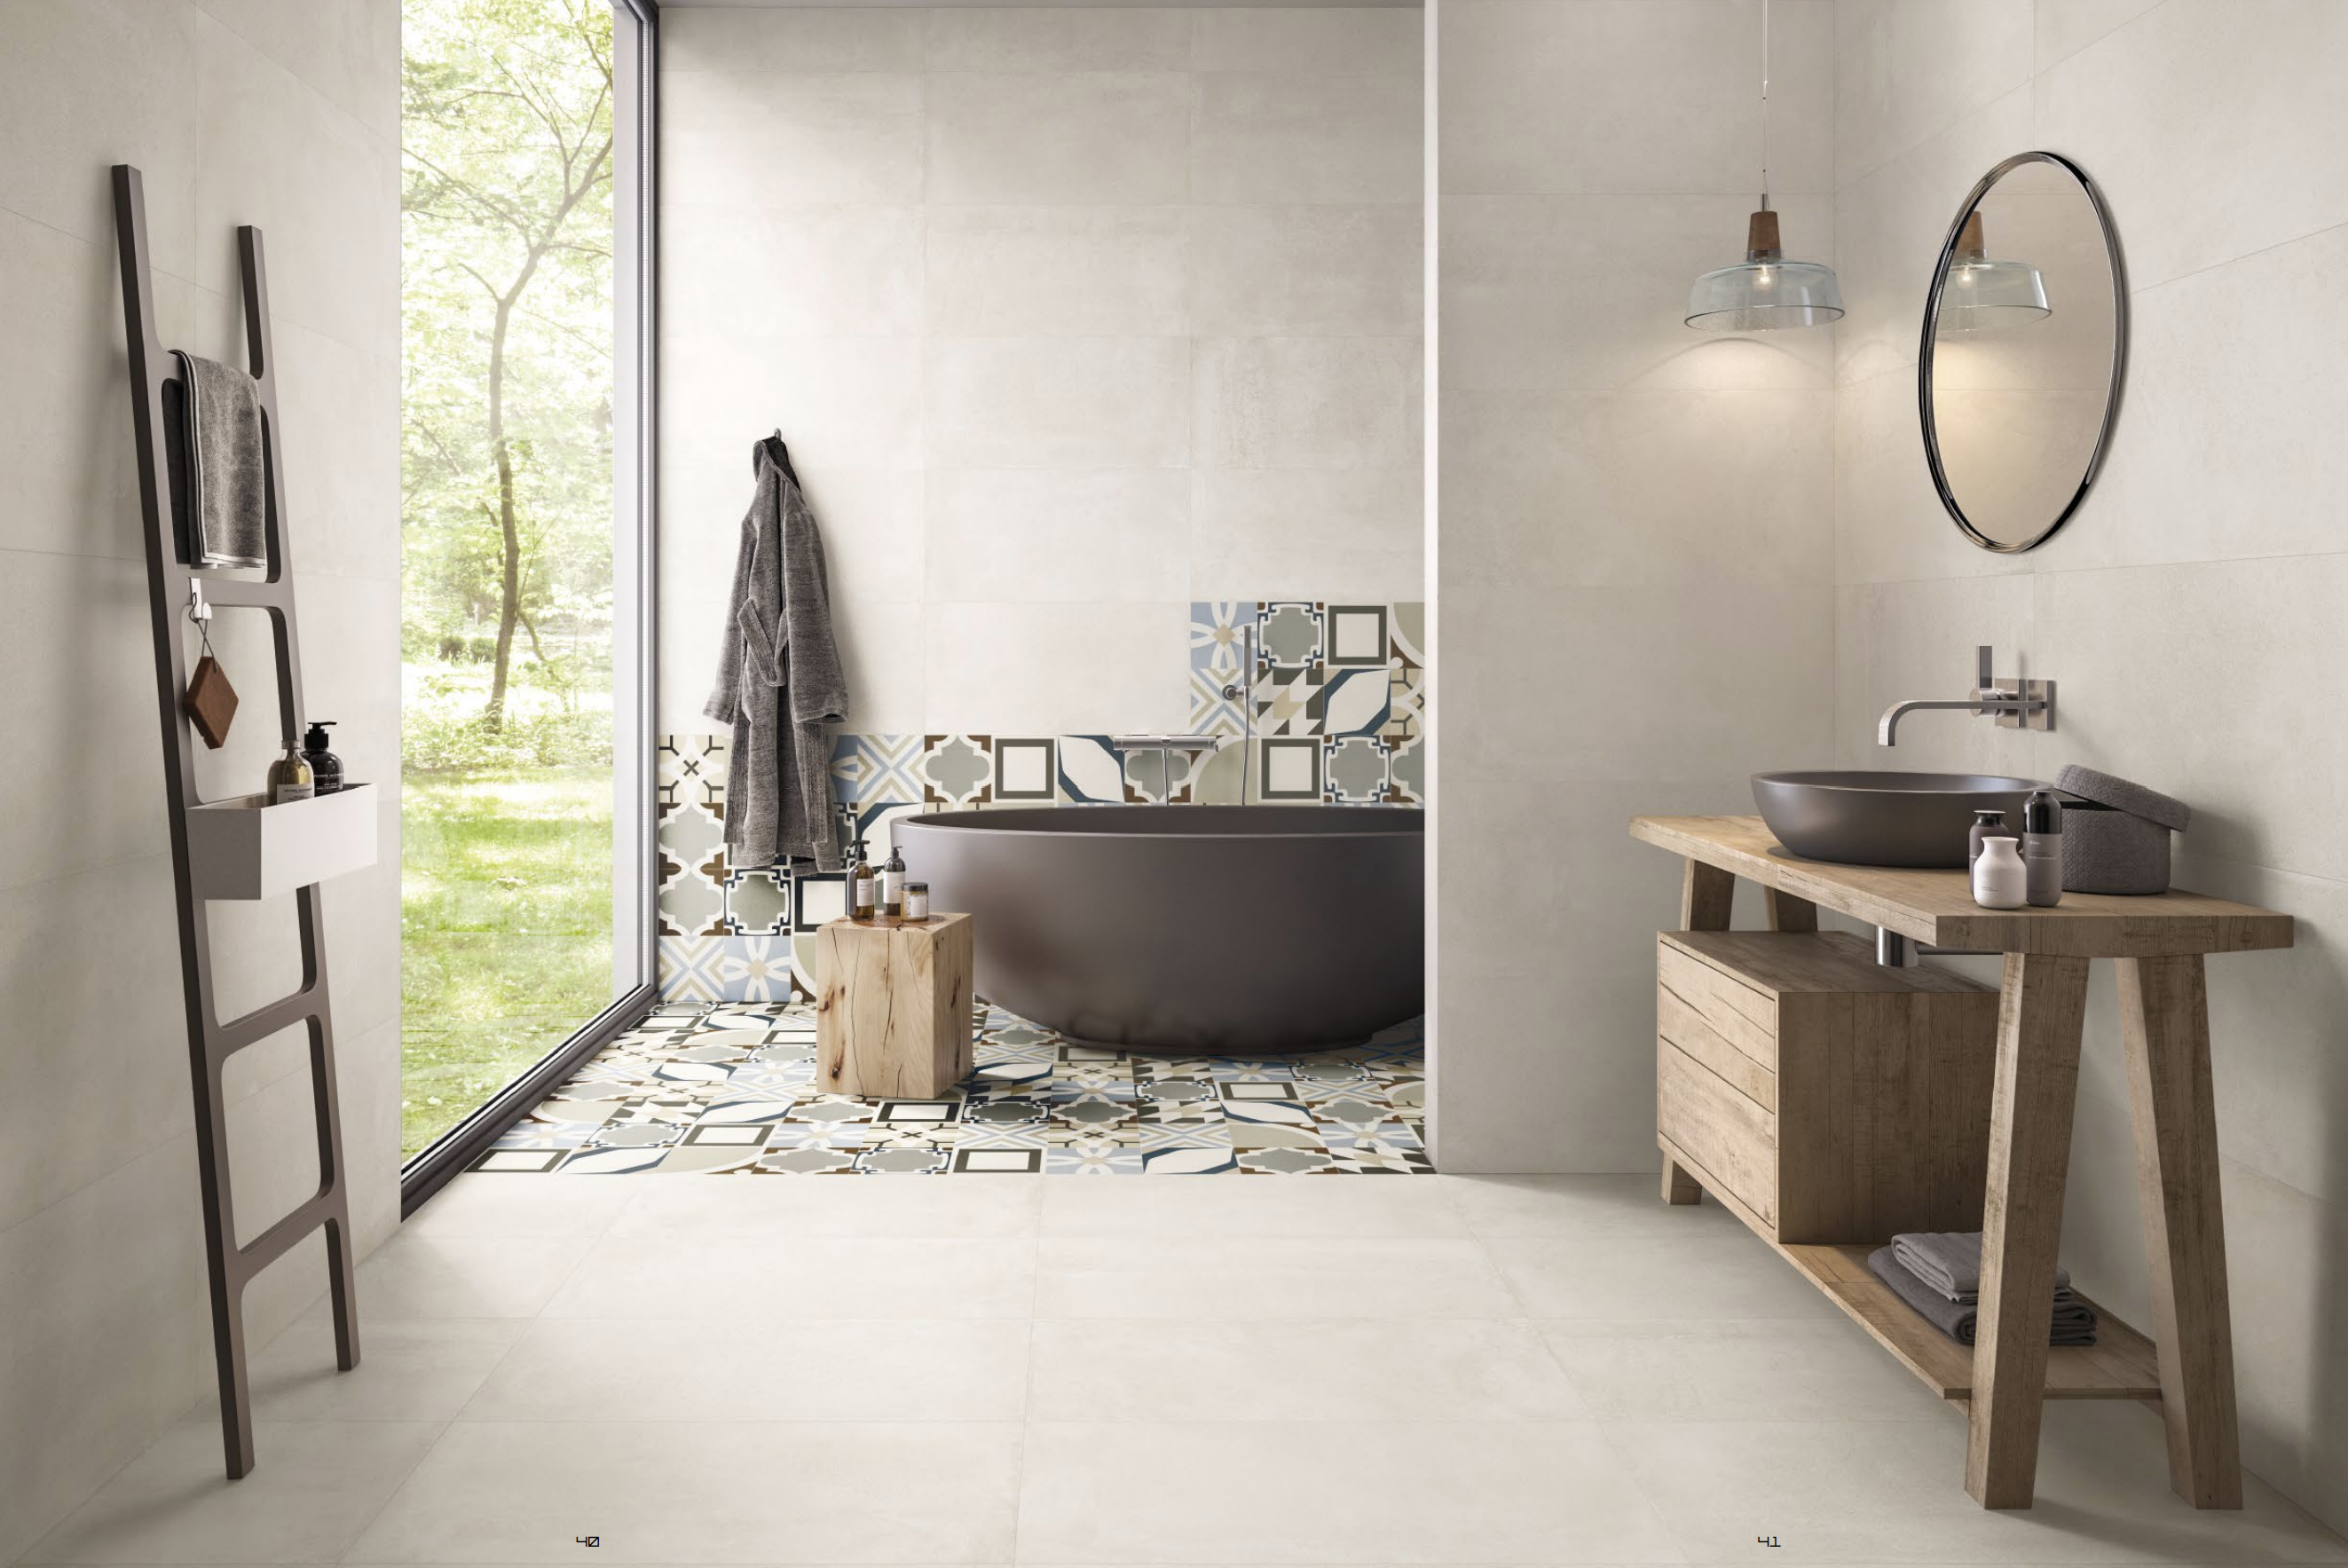 Ivory Be Square Series Porcelain Tile Floor by Emilceramica
